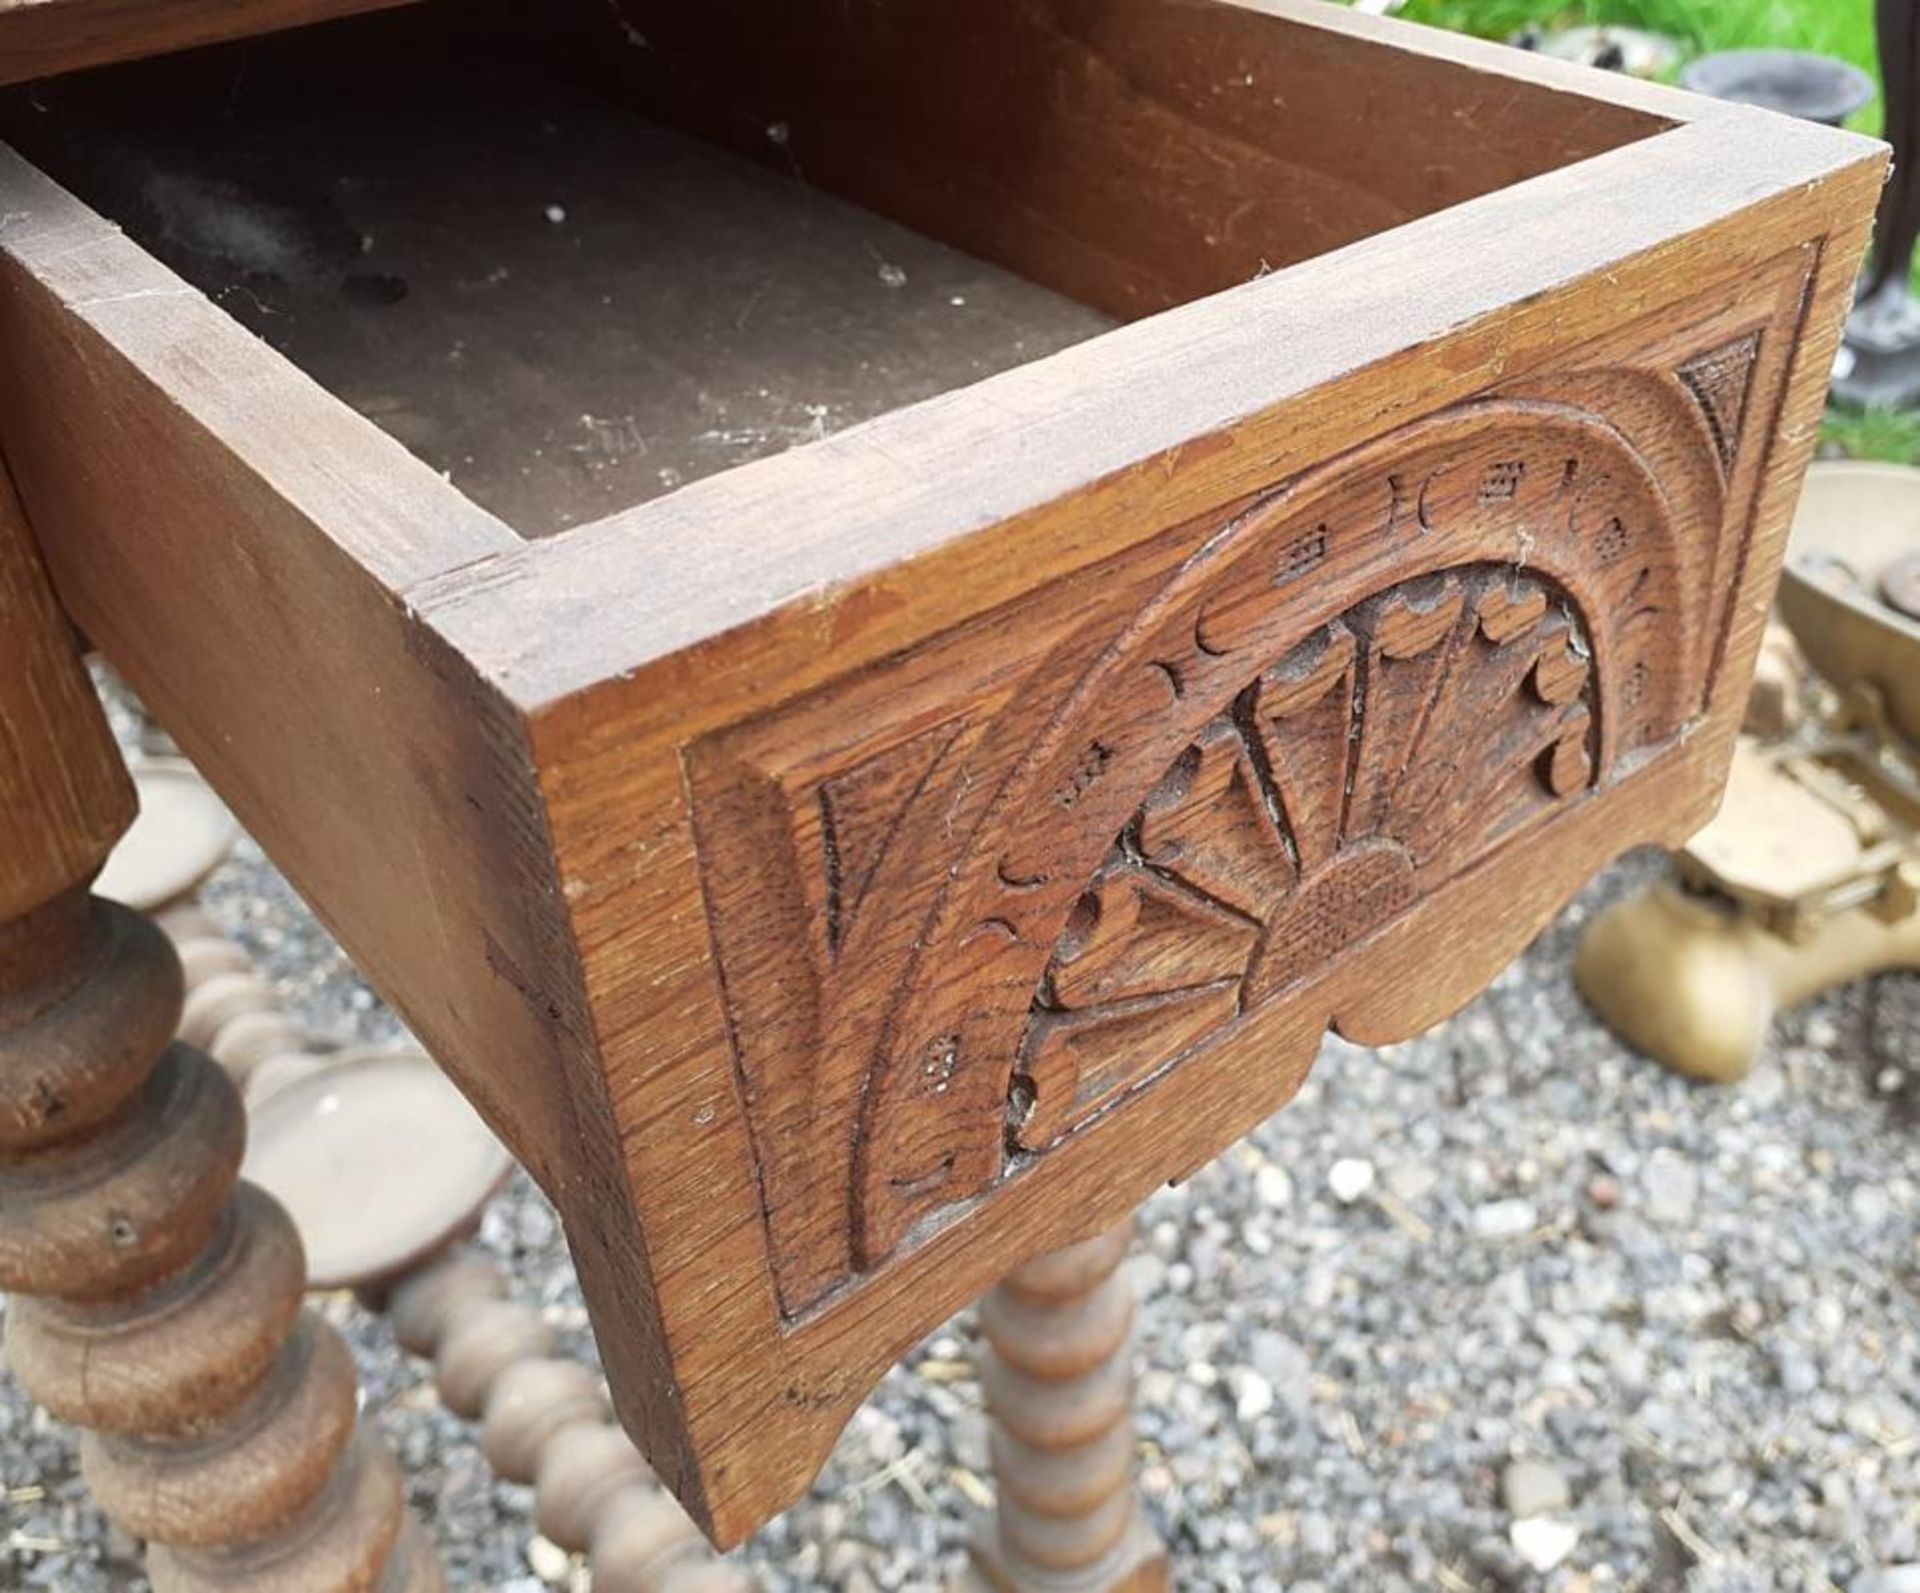 1 x Carved Wooden Console / Hallway Table With A Secret Drawer At Each End - Dimensions: Height 90cm - Image 3 of 8